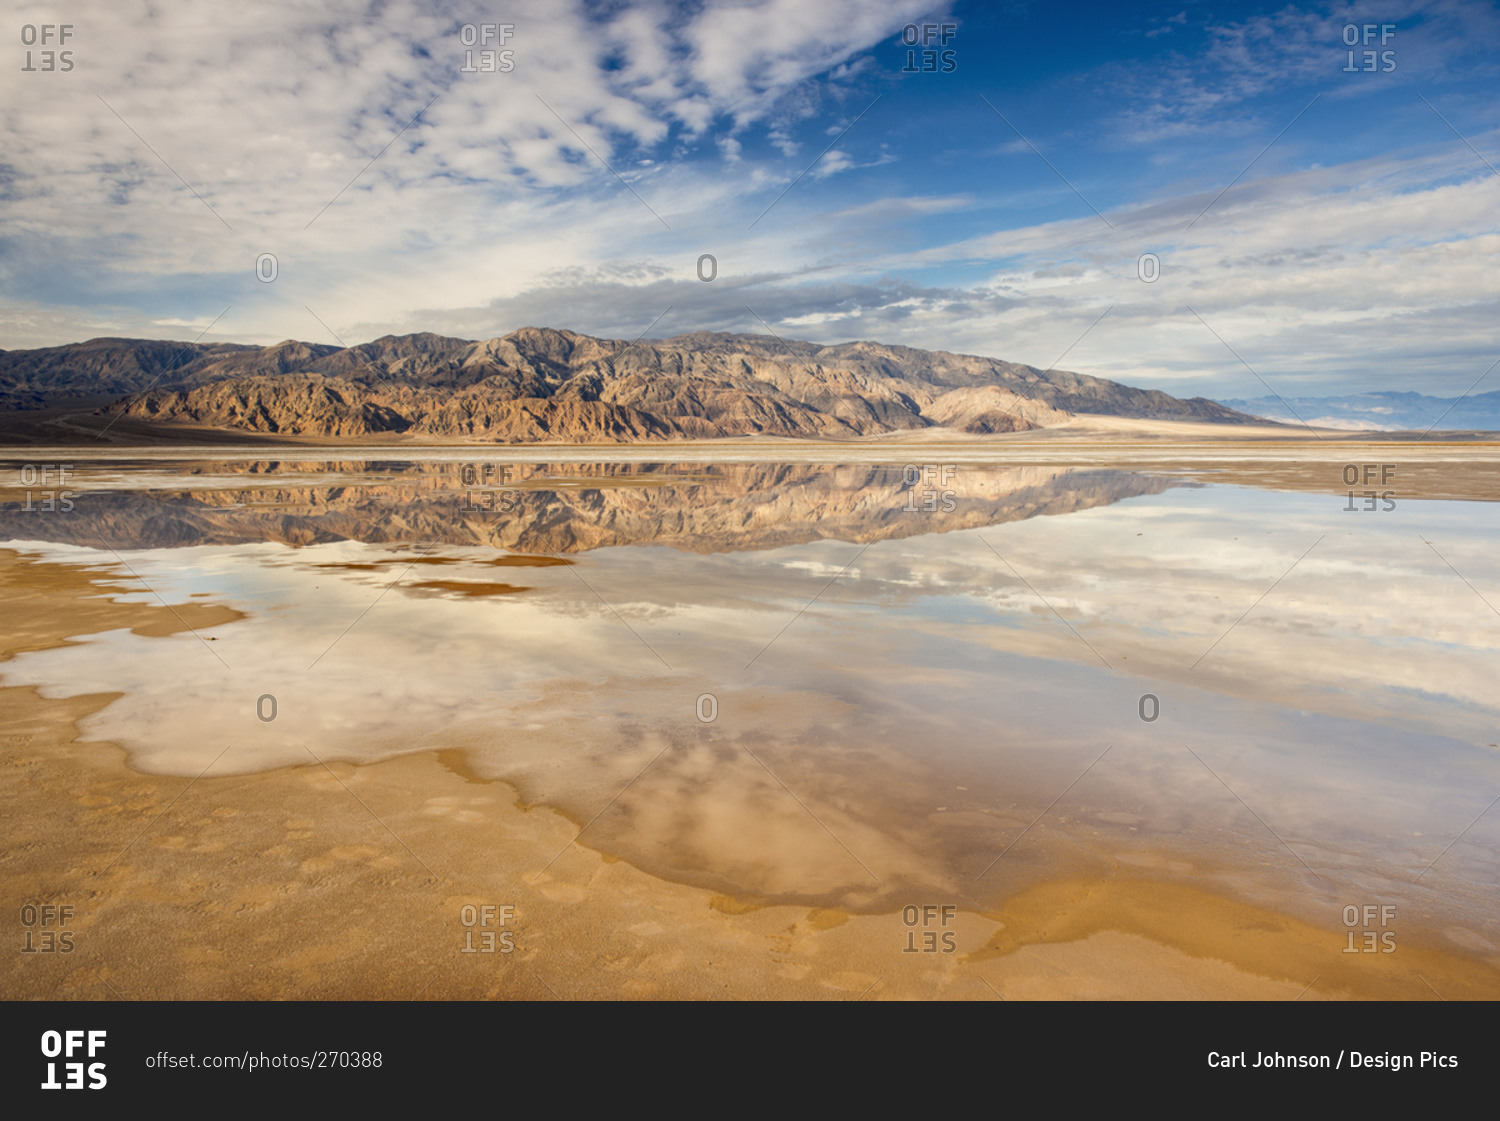 Salt flats and Panamint Mountains, Death Valley National Park, California, United States of America